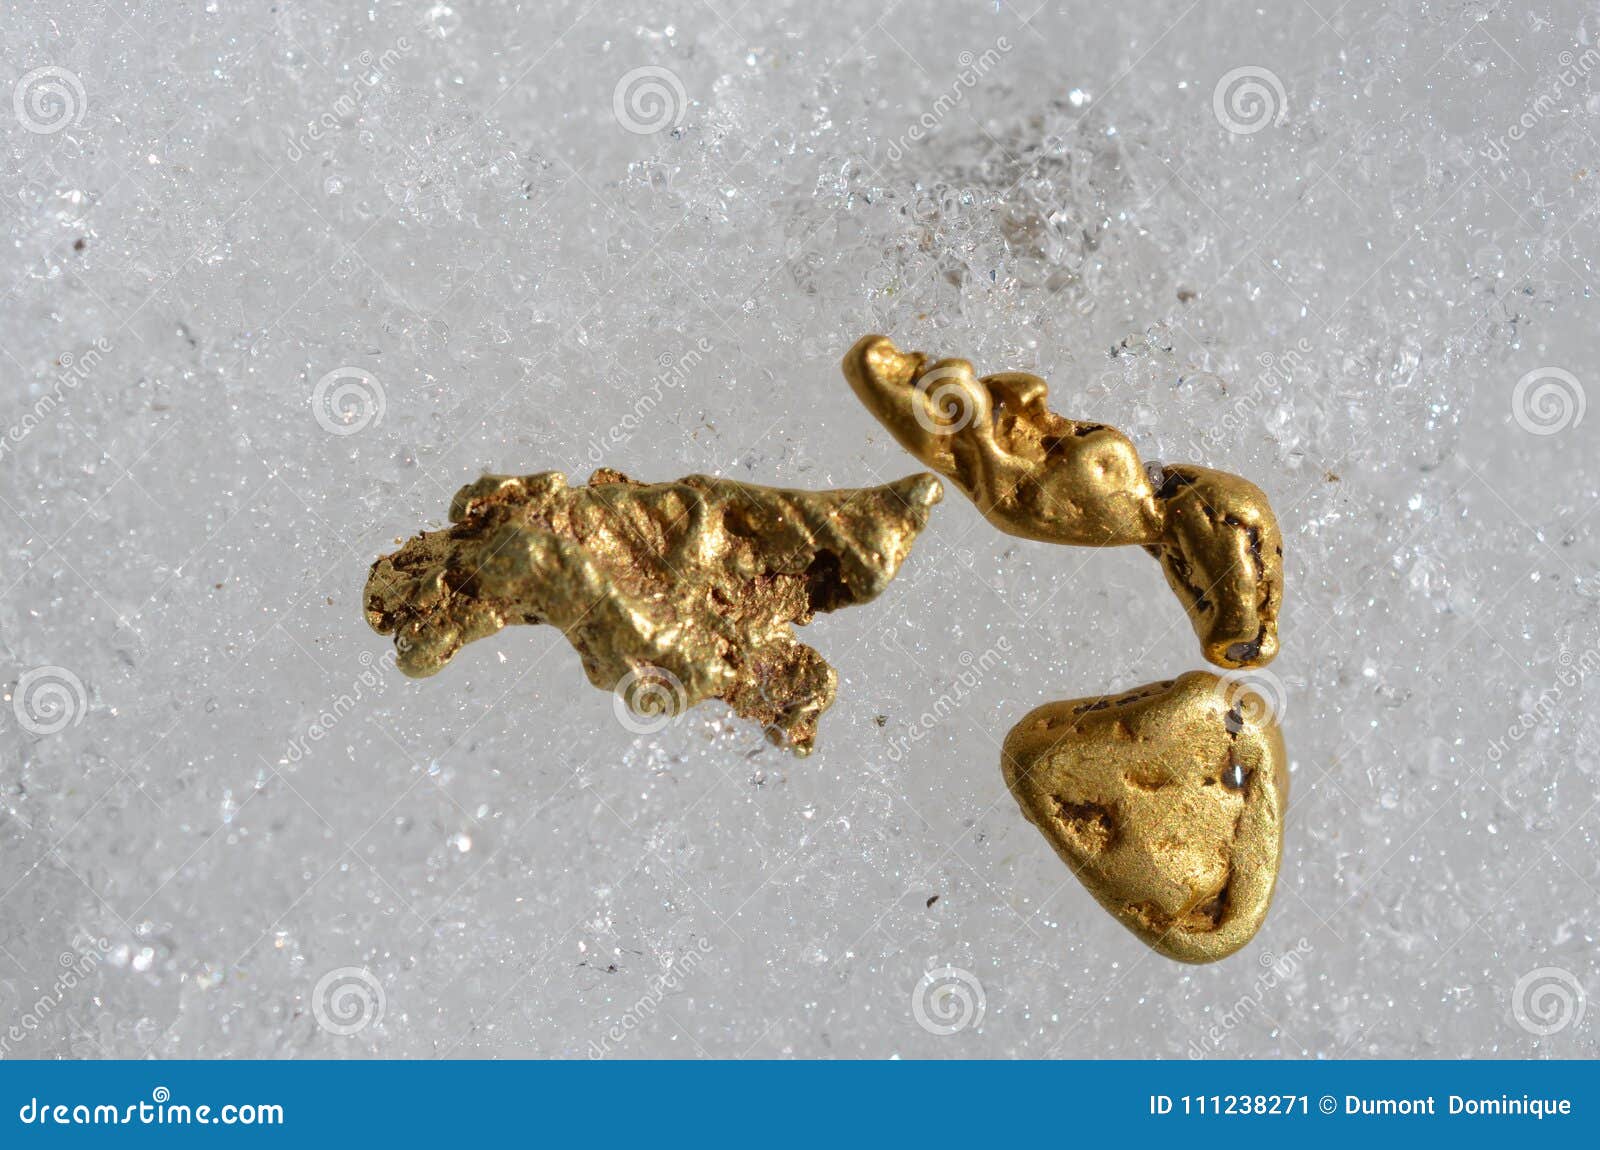 Gold Nuggets on Snow Taken Outdoors. Stock Image - Image of yellow